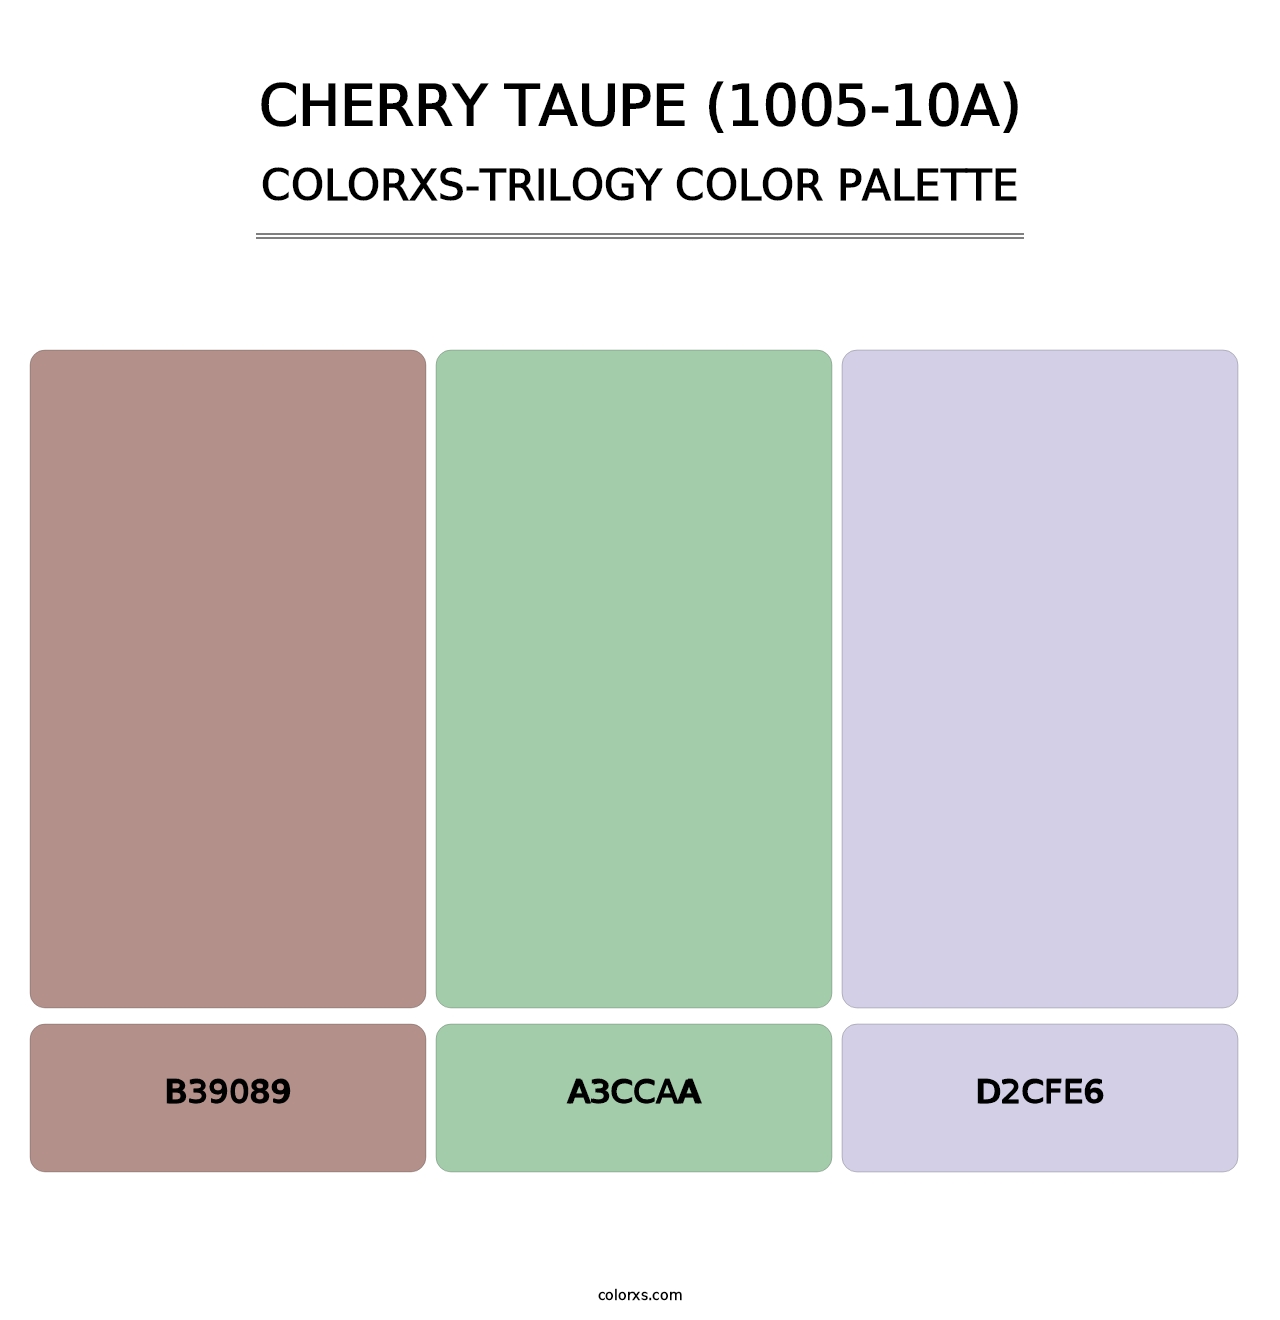 Cherry Taupe (1005-10A) - Colorxs Trilogy Palette